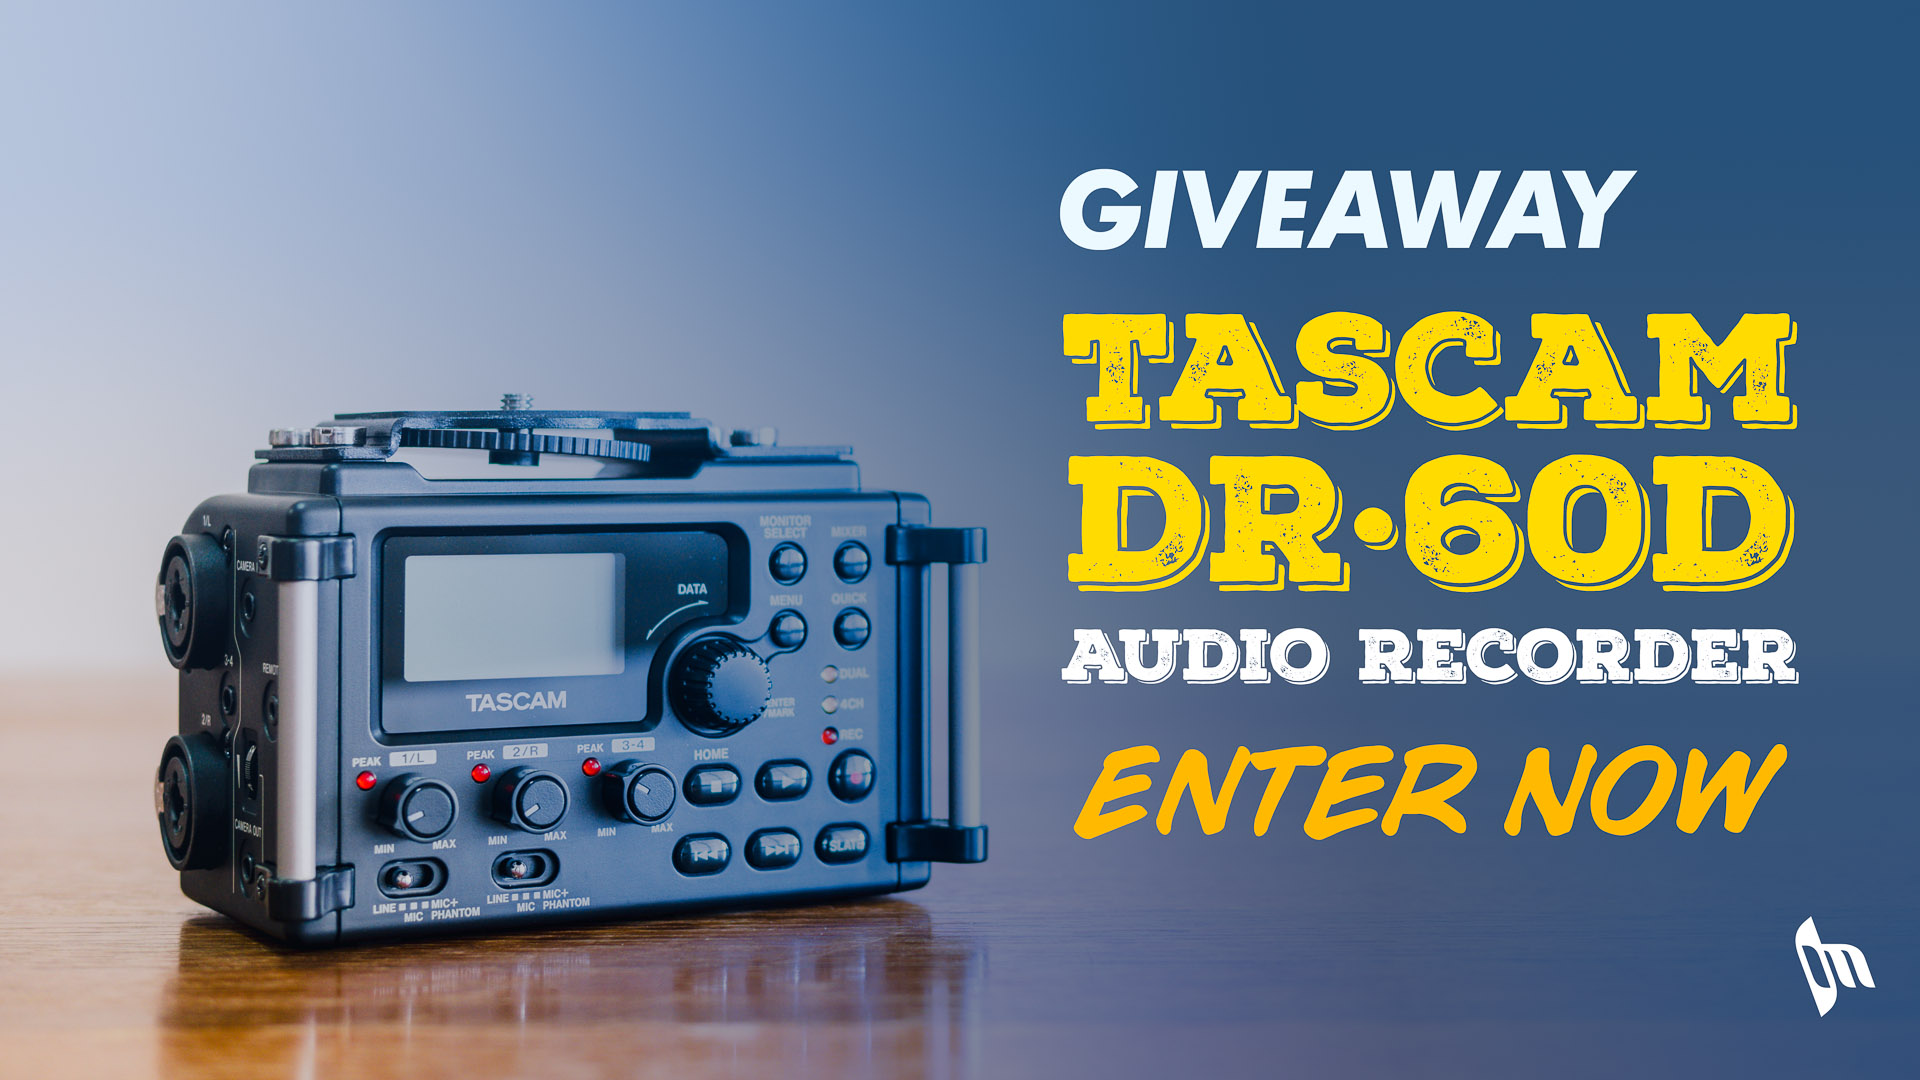 Giveaway: Win a Tascam DR-60D Audio Recorder